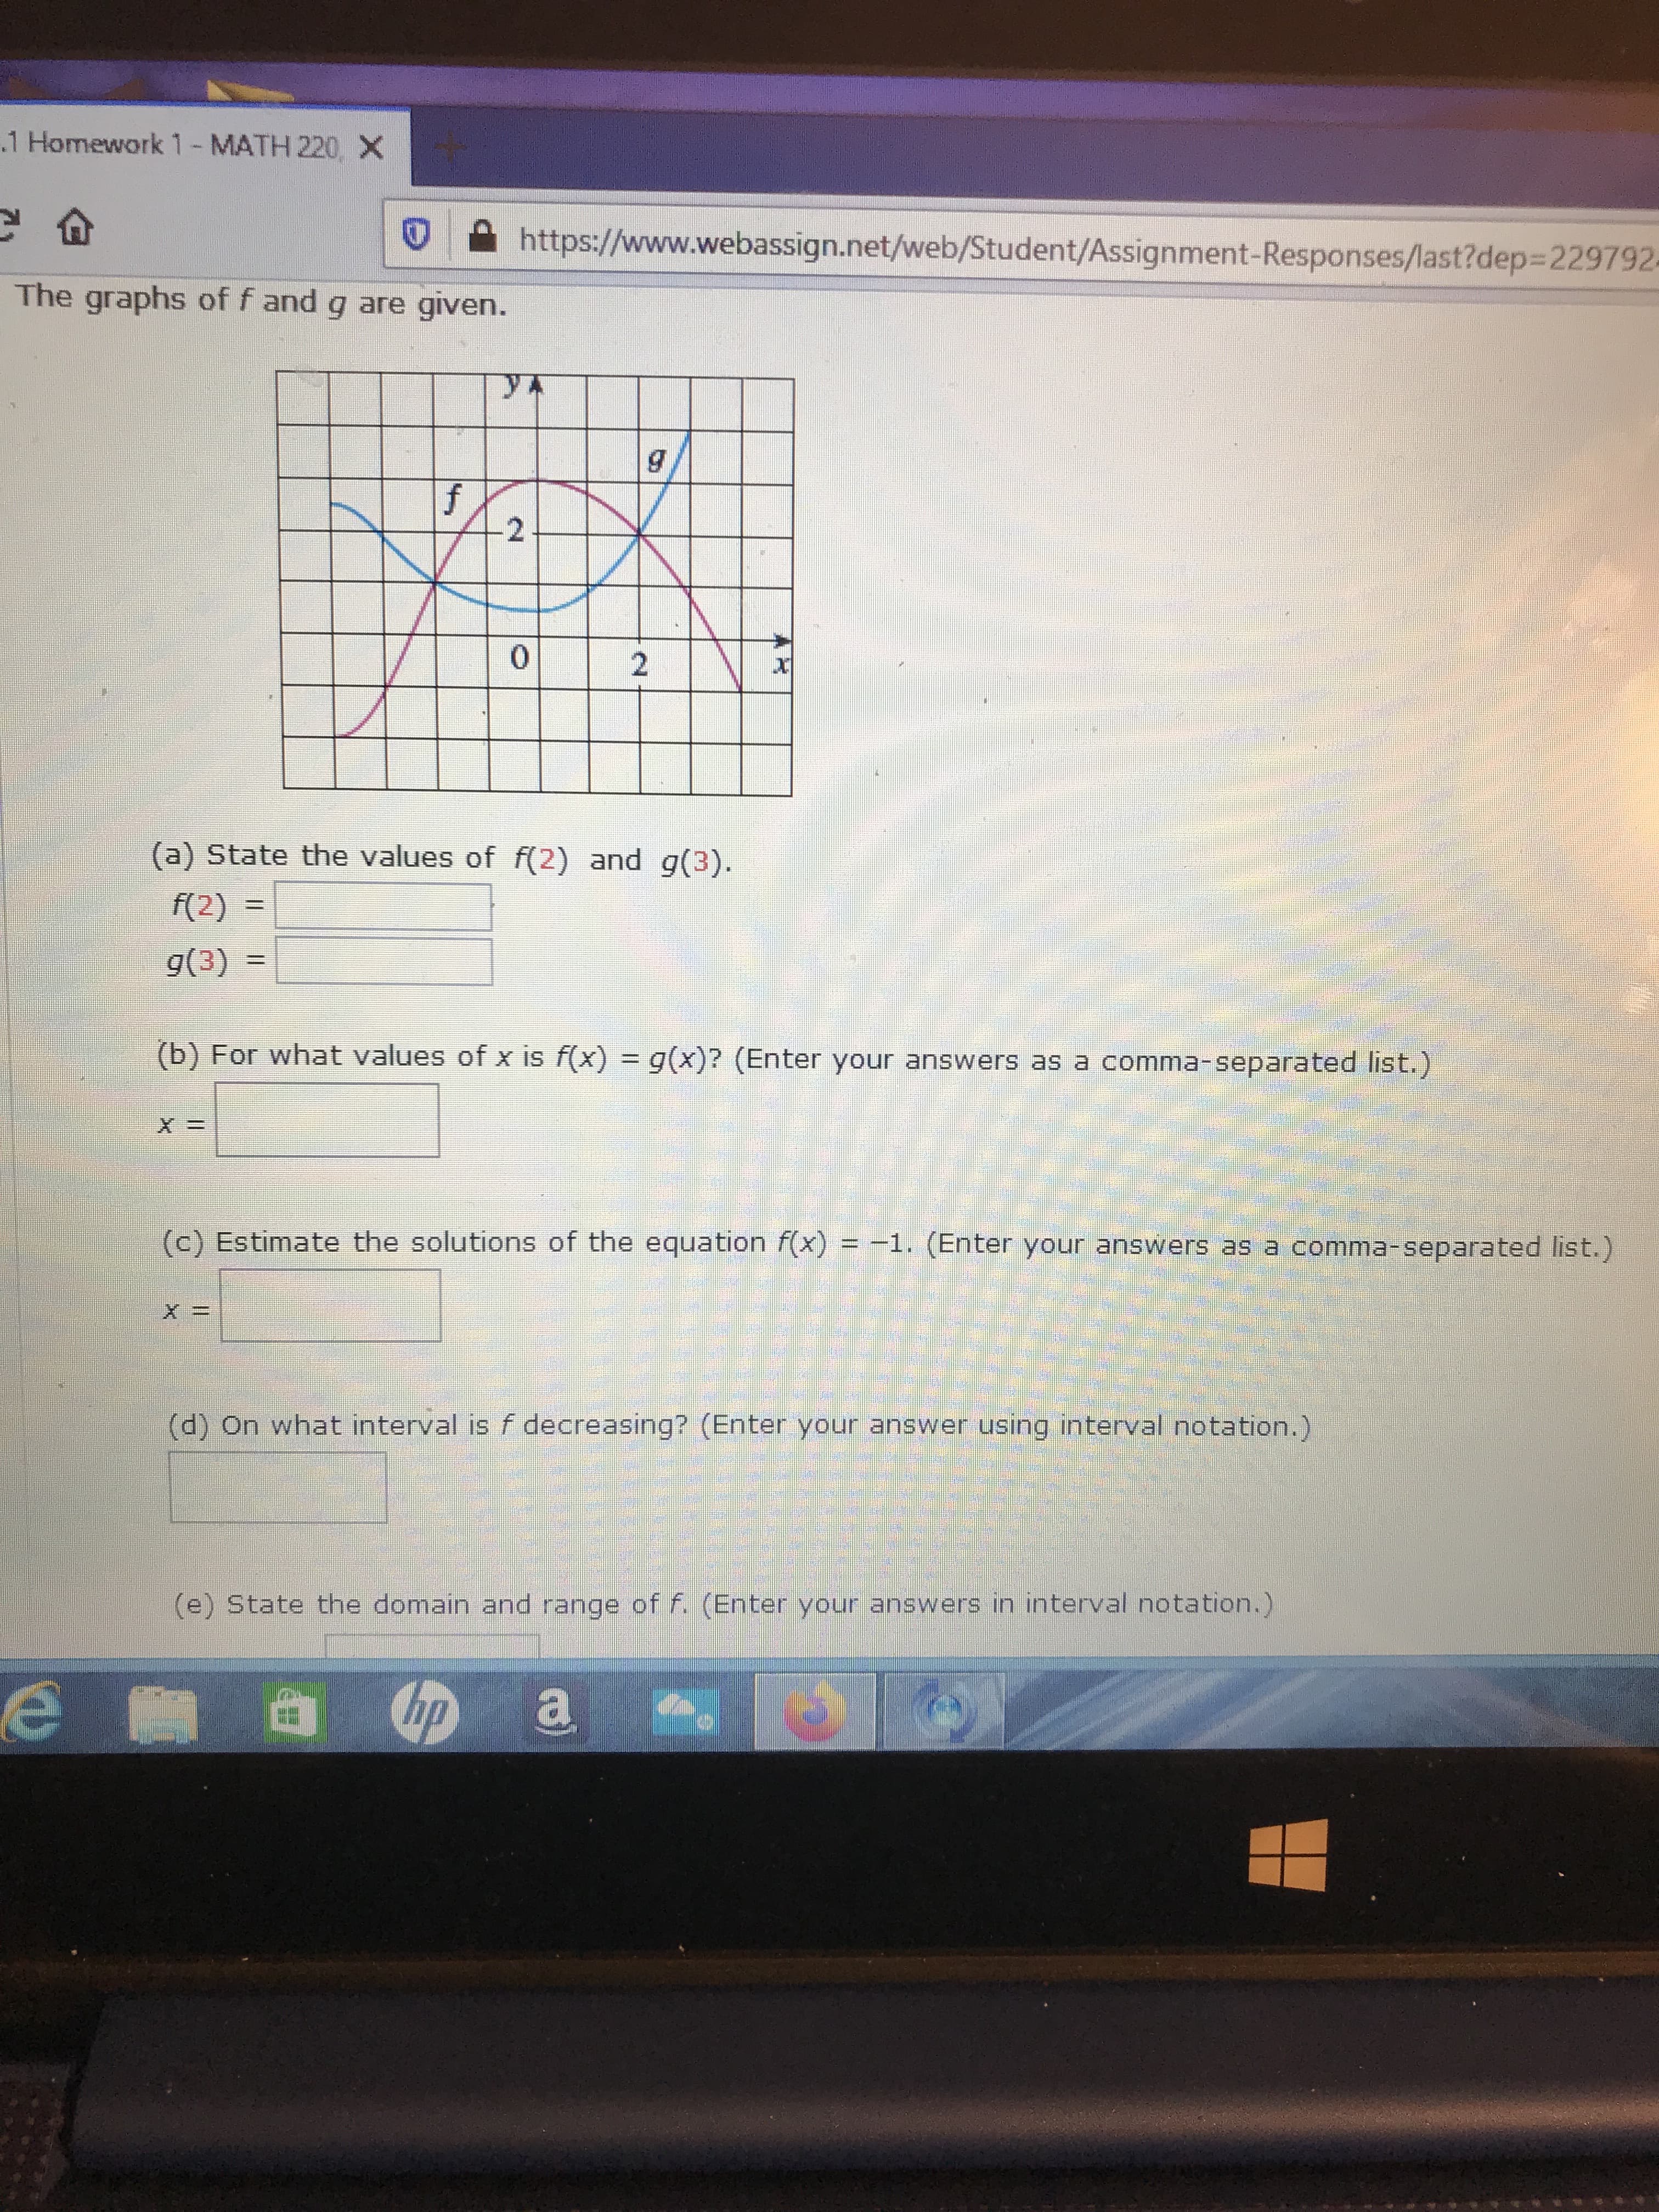 .1 Homework 1-MATH 220,X
https://www.webassign.net/web/Student/Assignment-Responses/last?dep3D2297924
The graphs of f and g are given.
yA
0.
(a) State the values of f(2) and g(3).
f(2)
%3D
g(3)
%3D
(b) For what values of x is f(x) = g(x)? (Enter your answers as a comma-separated list.)
(c) Estimate the solutions of the equation f(x) = -1. (Enter your answers as a comma-separated list.)
(d) On what interval is f decreasing? (Enter your answer using interval notation.)
(e) State the domain and range of f. (Enter your answers in interval notation.)
2.
